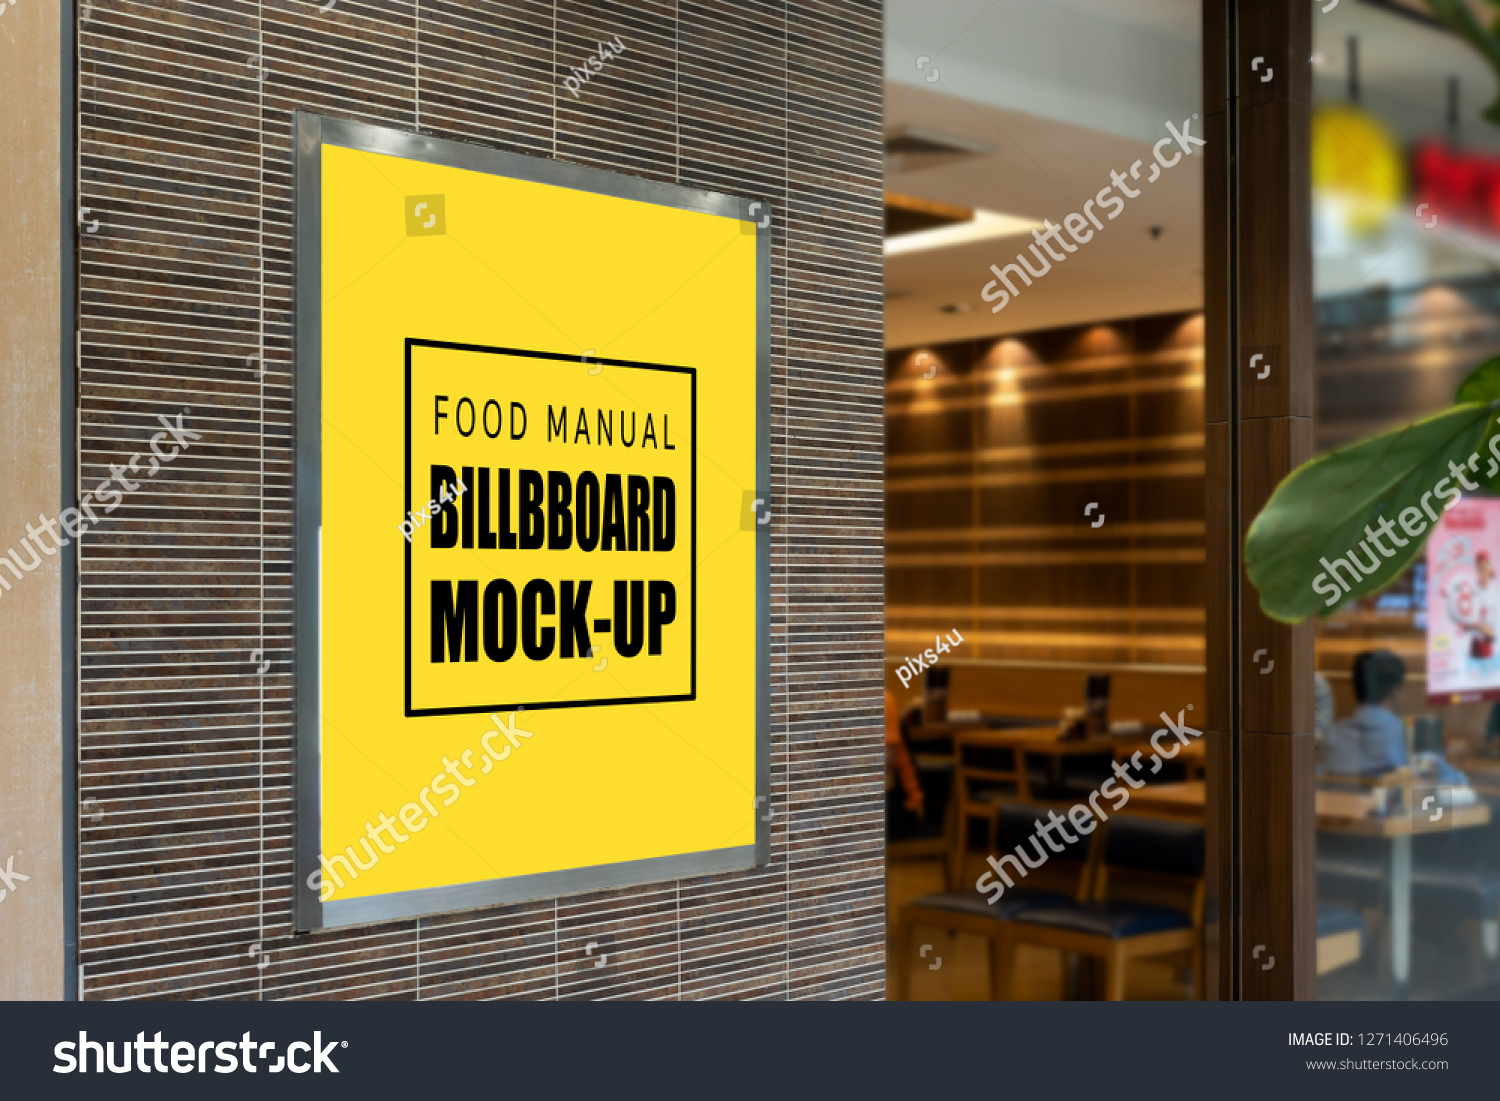 Download Mock Perspective Blank Yellow Screen Signboard Stock Photo Edit Now 1271406496 PSD Mockup Templates